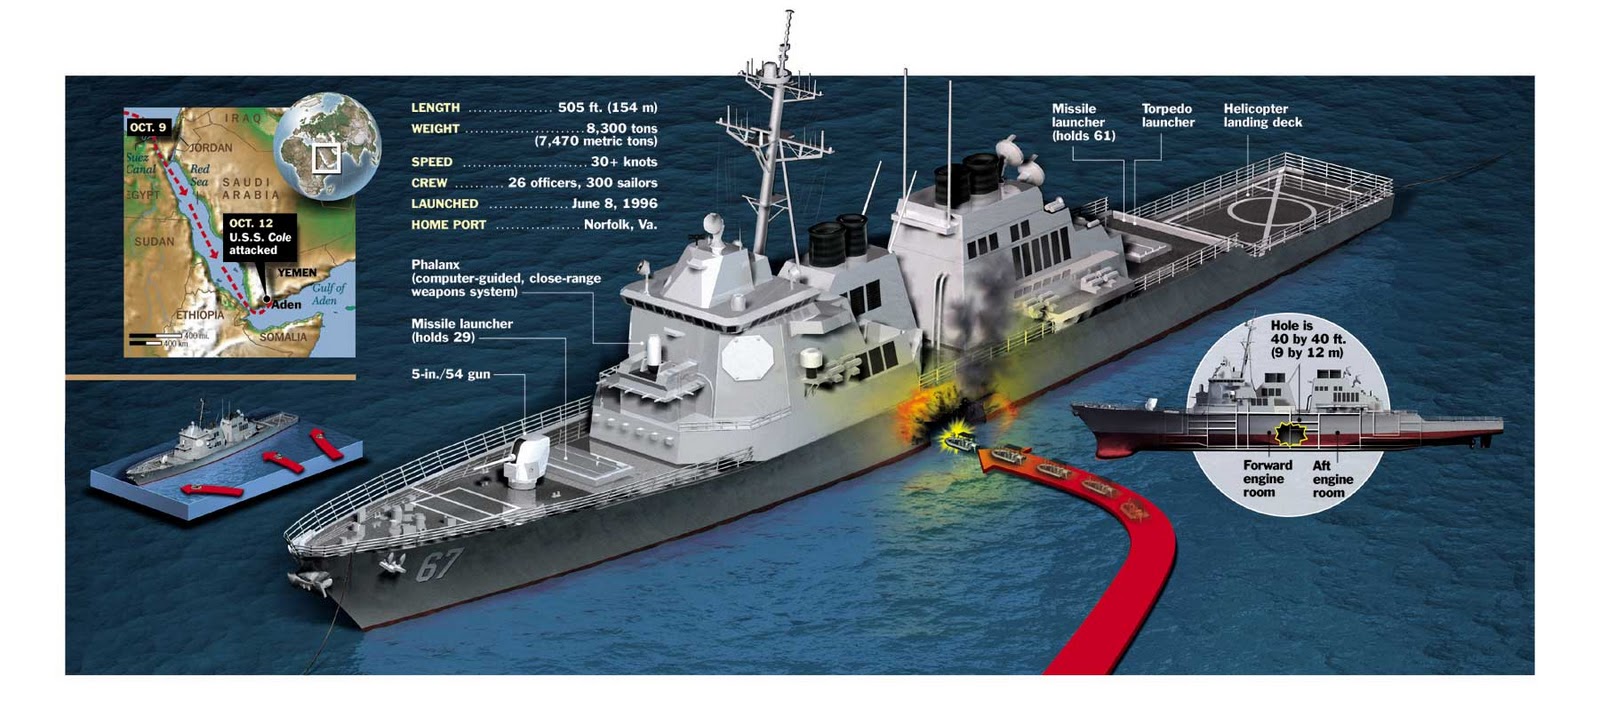 The Bombing Of The Uss Cole